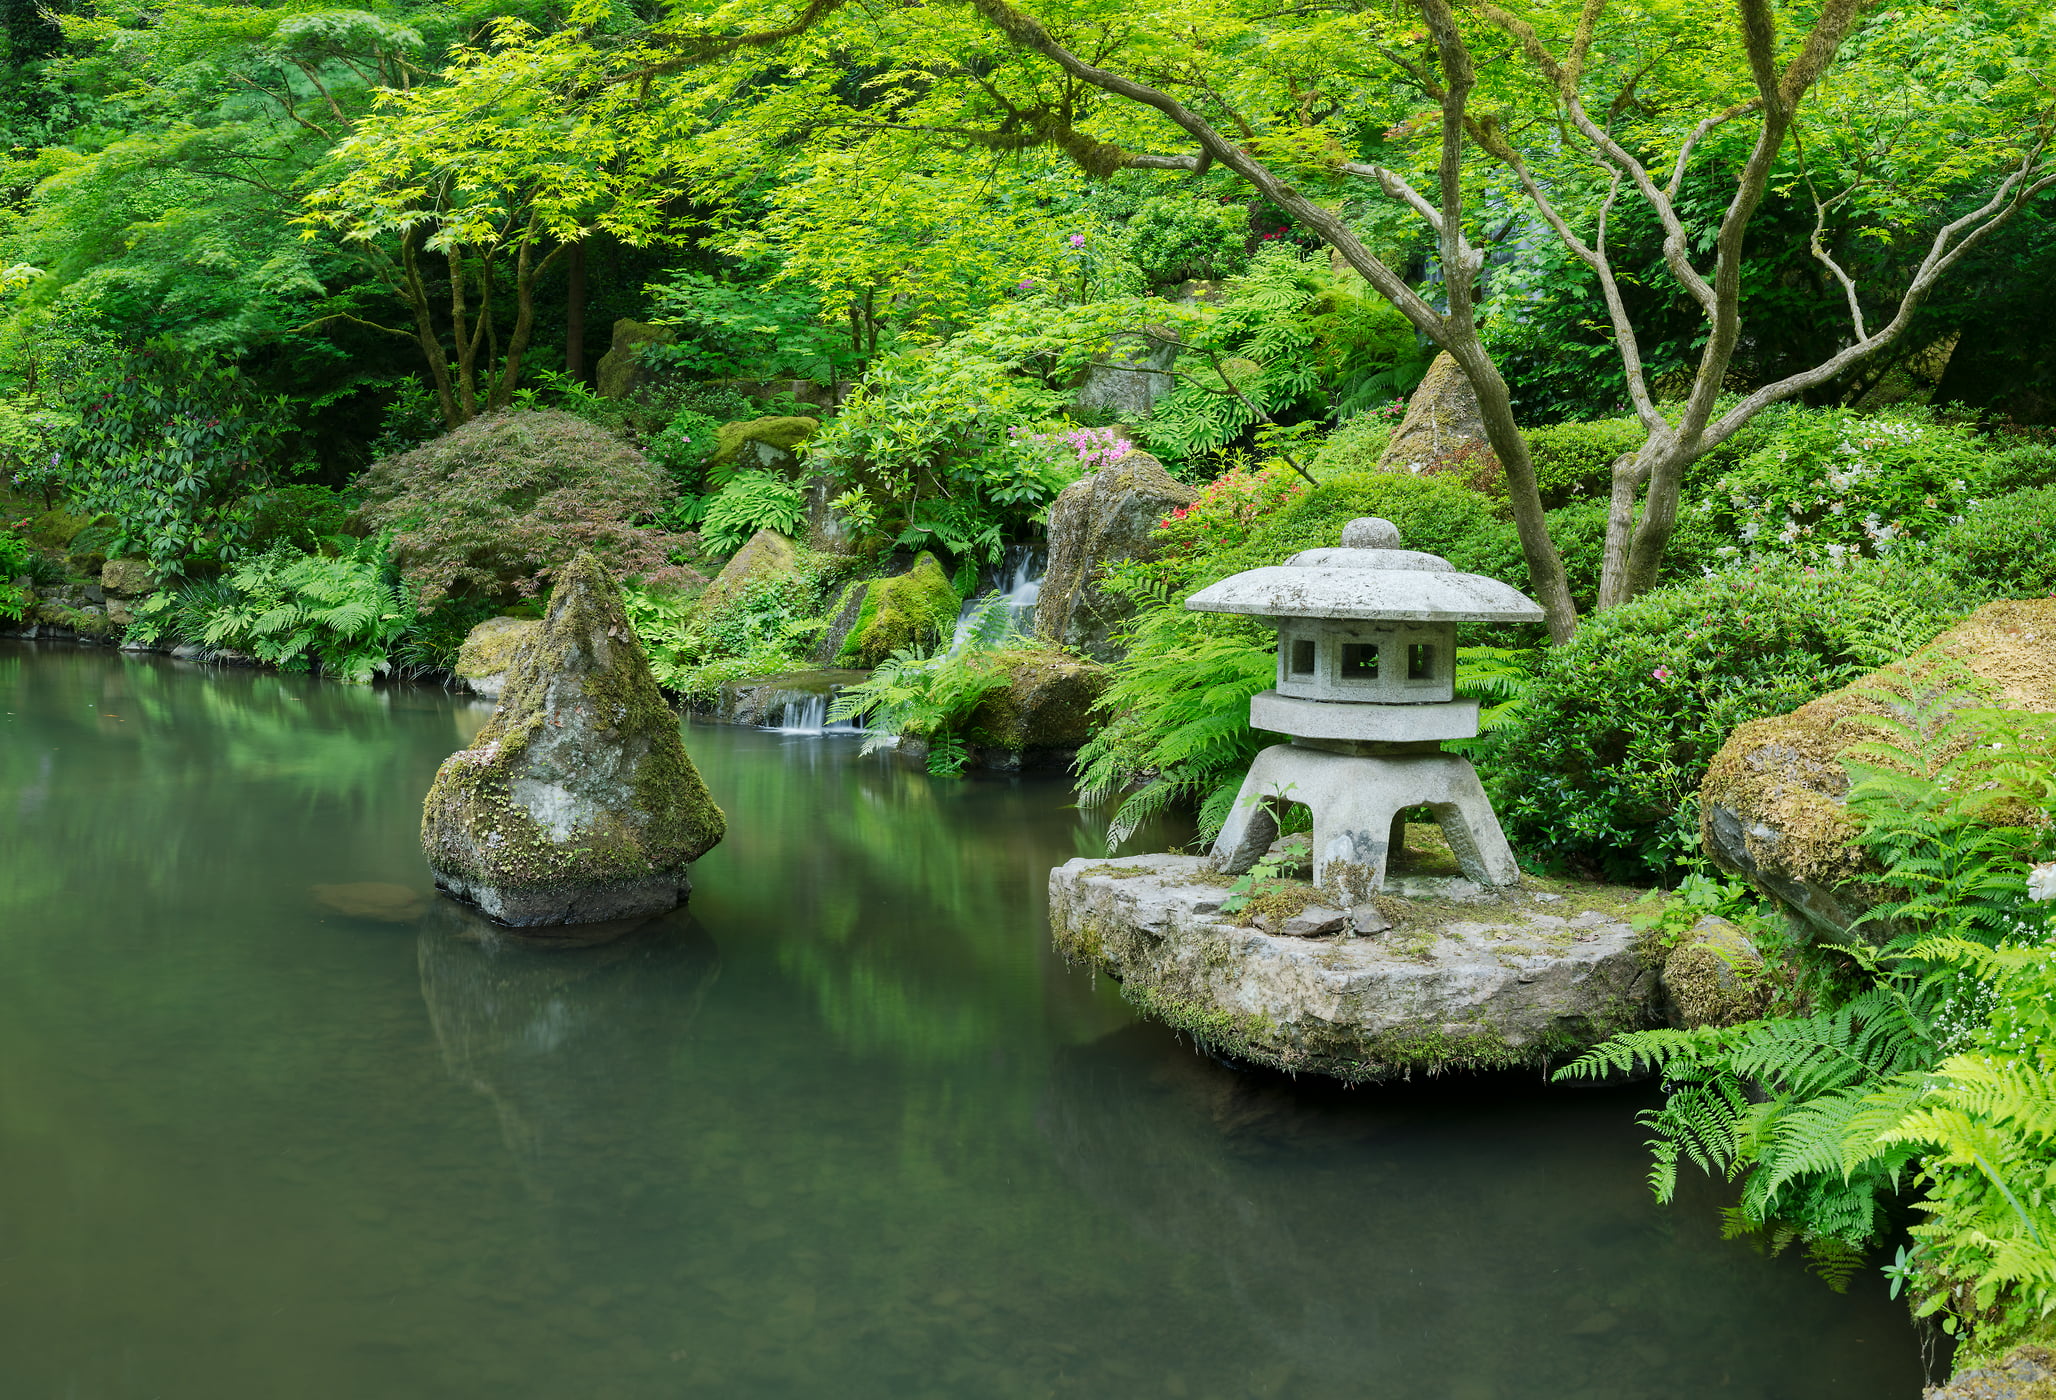 400 megapixels! A very high resolution, large-format VAST photo print of a Japanese garden with a pond and t?r? stone lantern; photograph created by Greg Probst in Japanese Garden in Portland, Oregon.